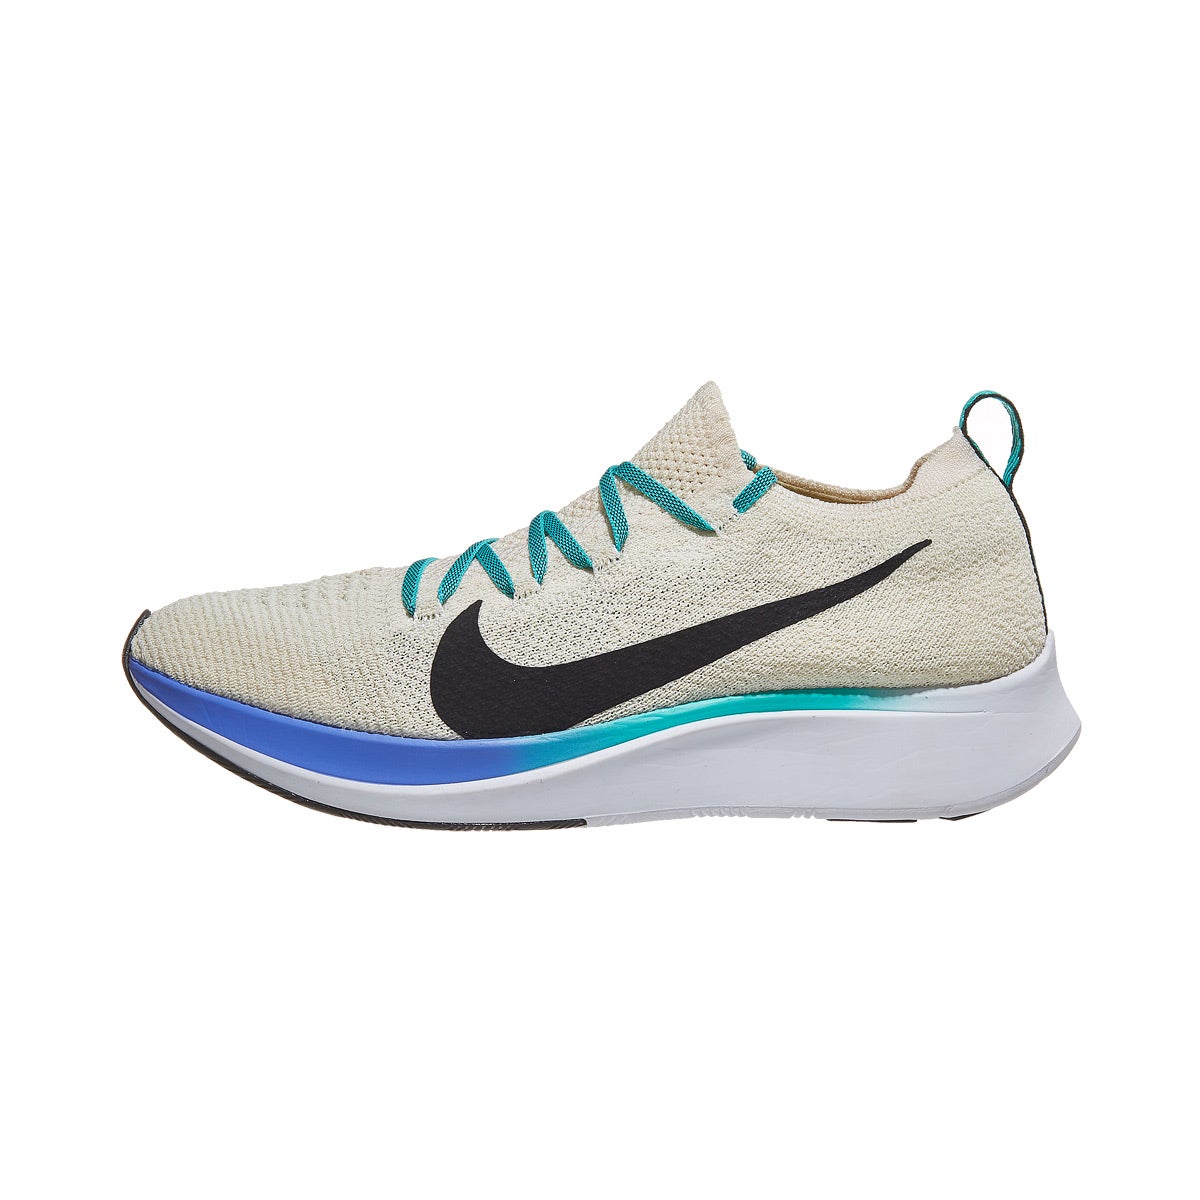 Nike Zoom Fly Flyknit Women's Shoes Light Cream/Blac 360° View ...